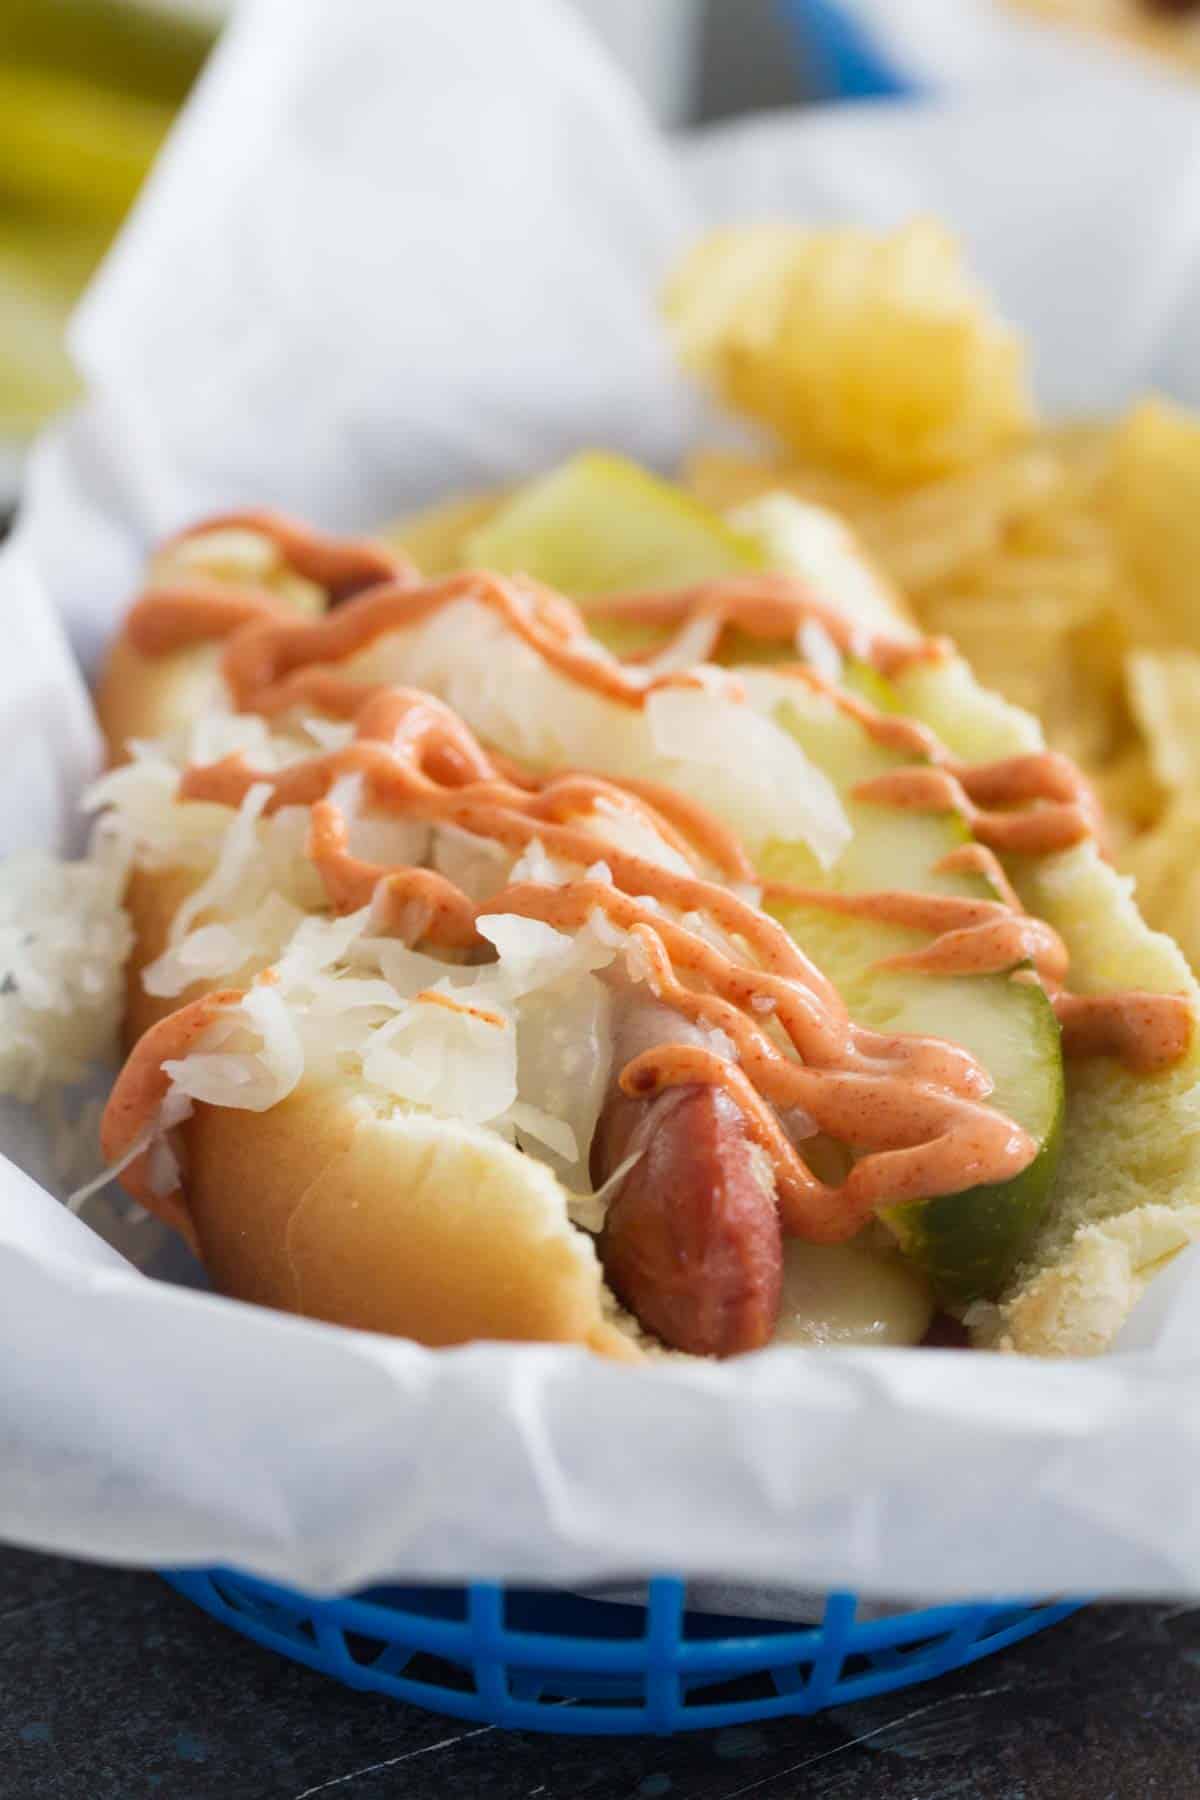 Hot dog with sauerkraut, pickle, and homemade Russian dressing